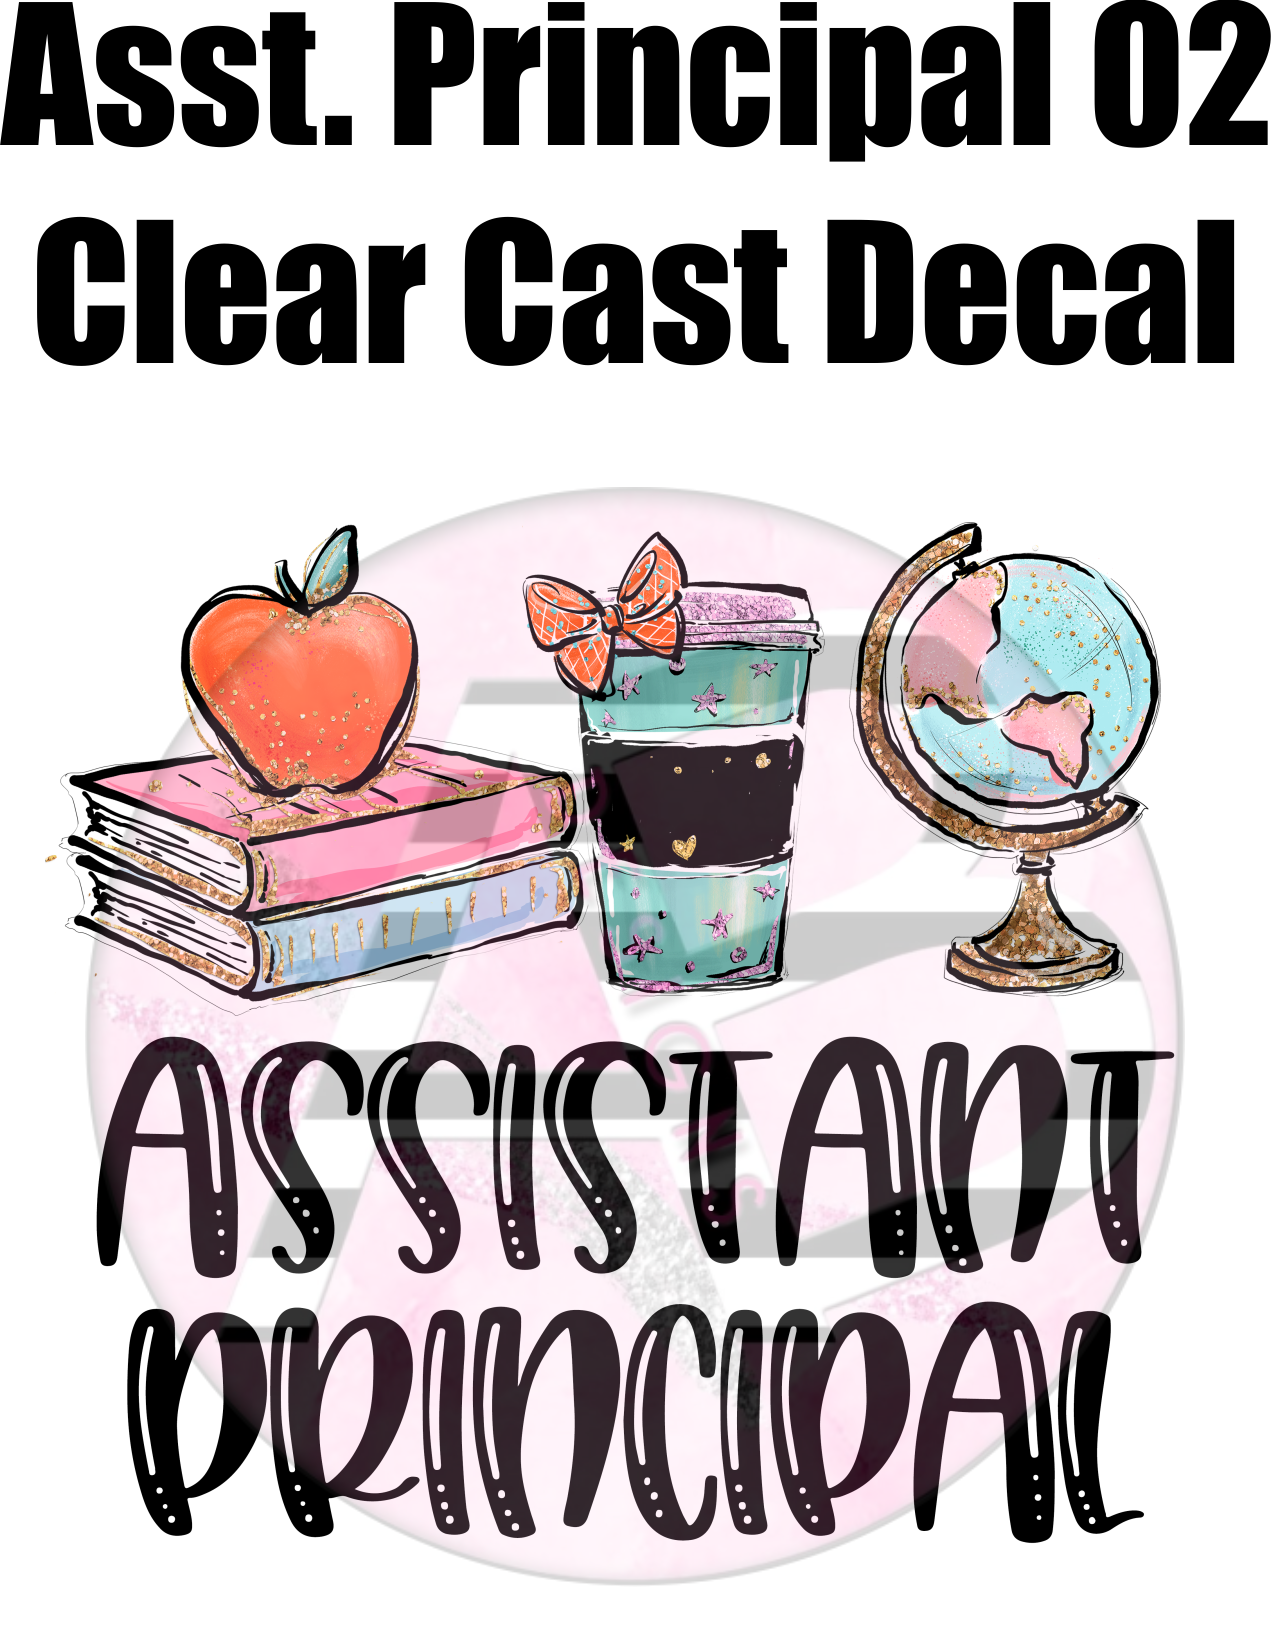 Assistant Principal 02 - Clear Cast Decal